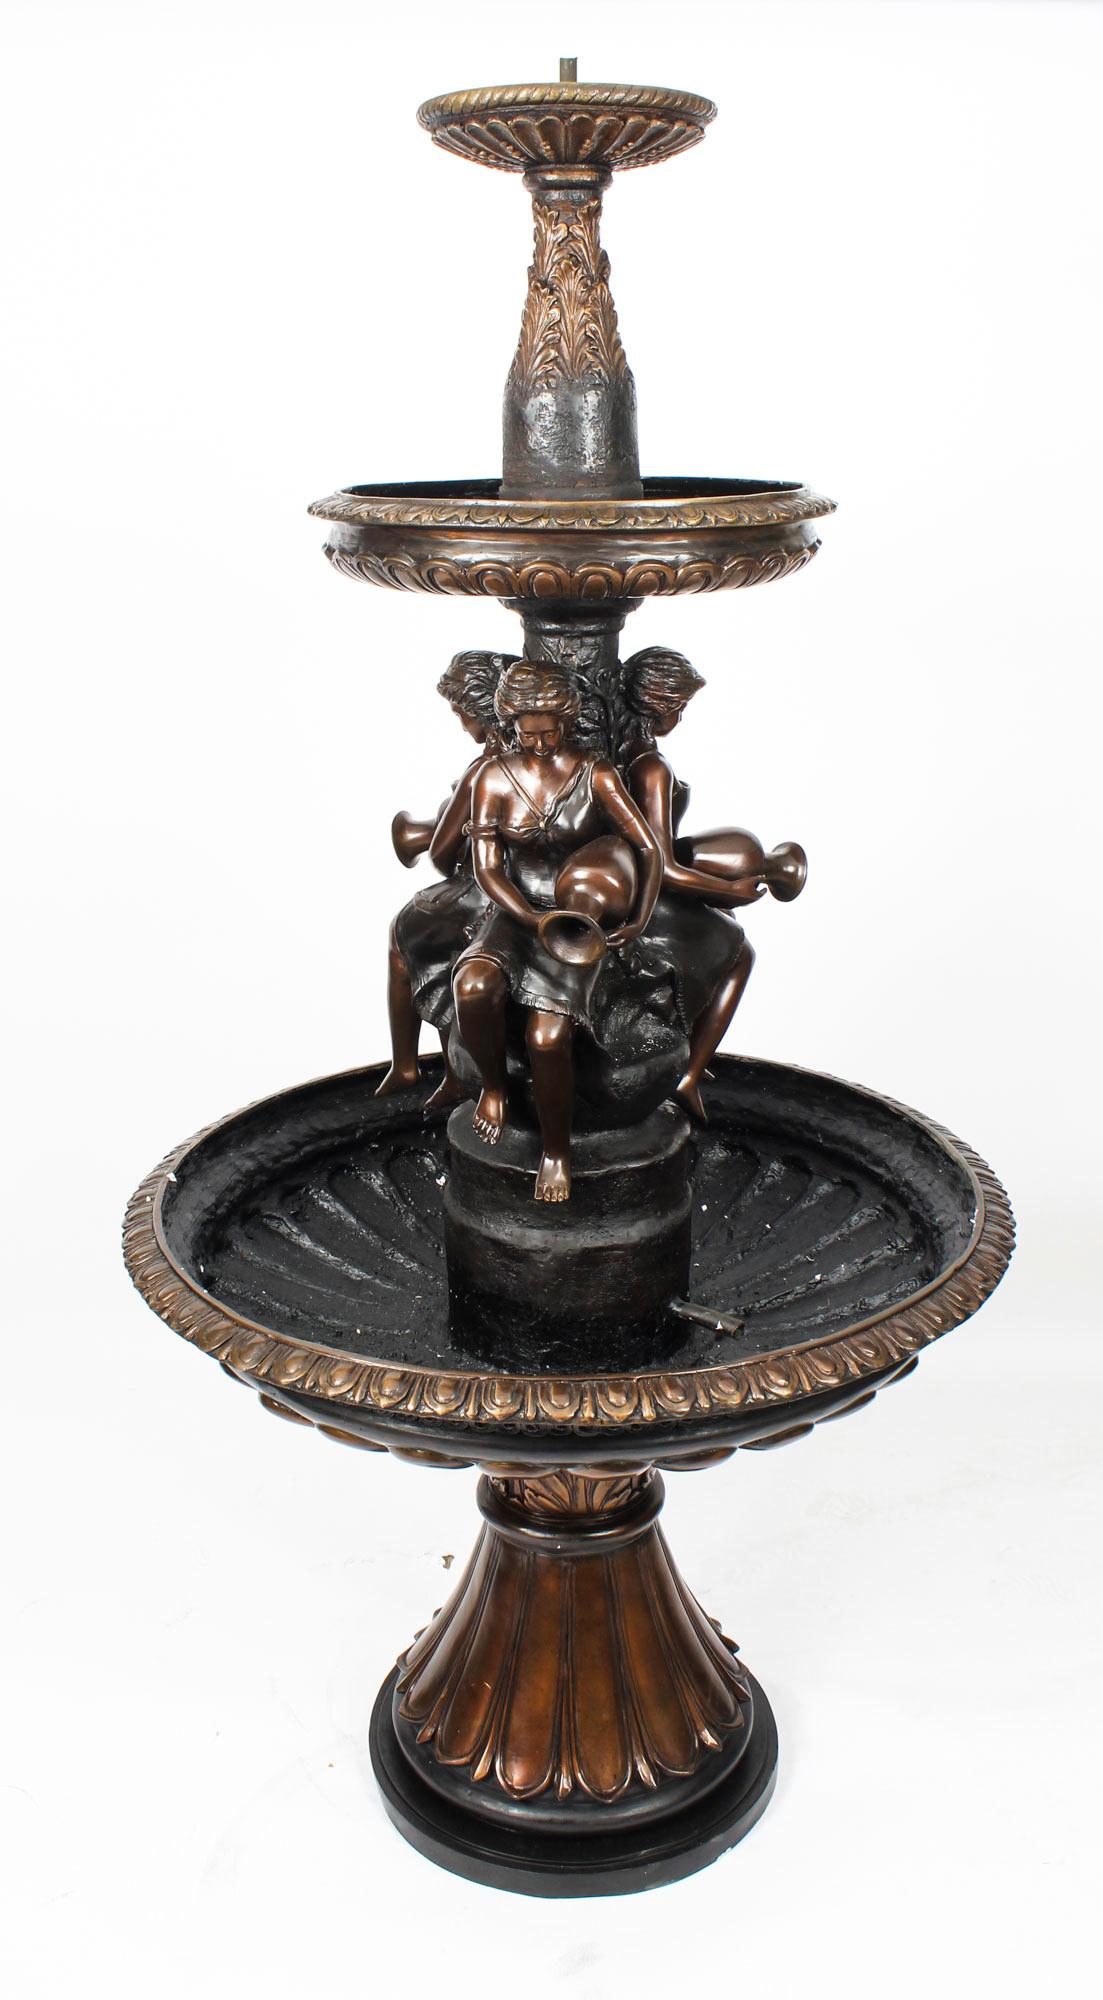 This is a beautiful vintage three-tier free standing or pond garden fountain sculpted in bronze in the Victorian style, dating from the late 20th century.
 
The fountain is heavily decorated with acanthus leaves, anthemion and fluting in high